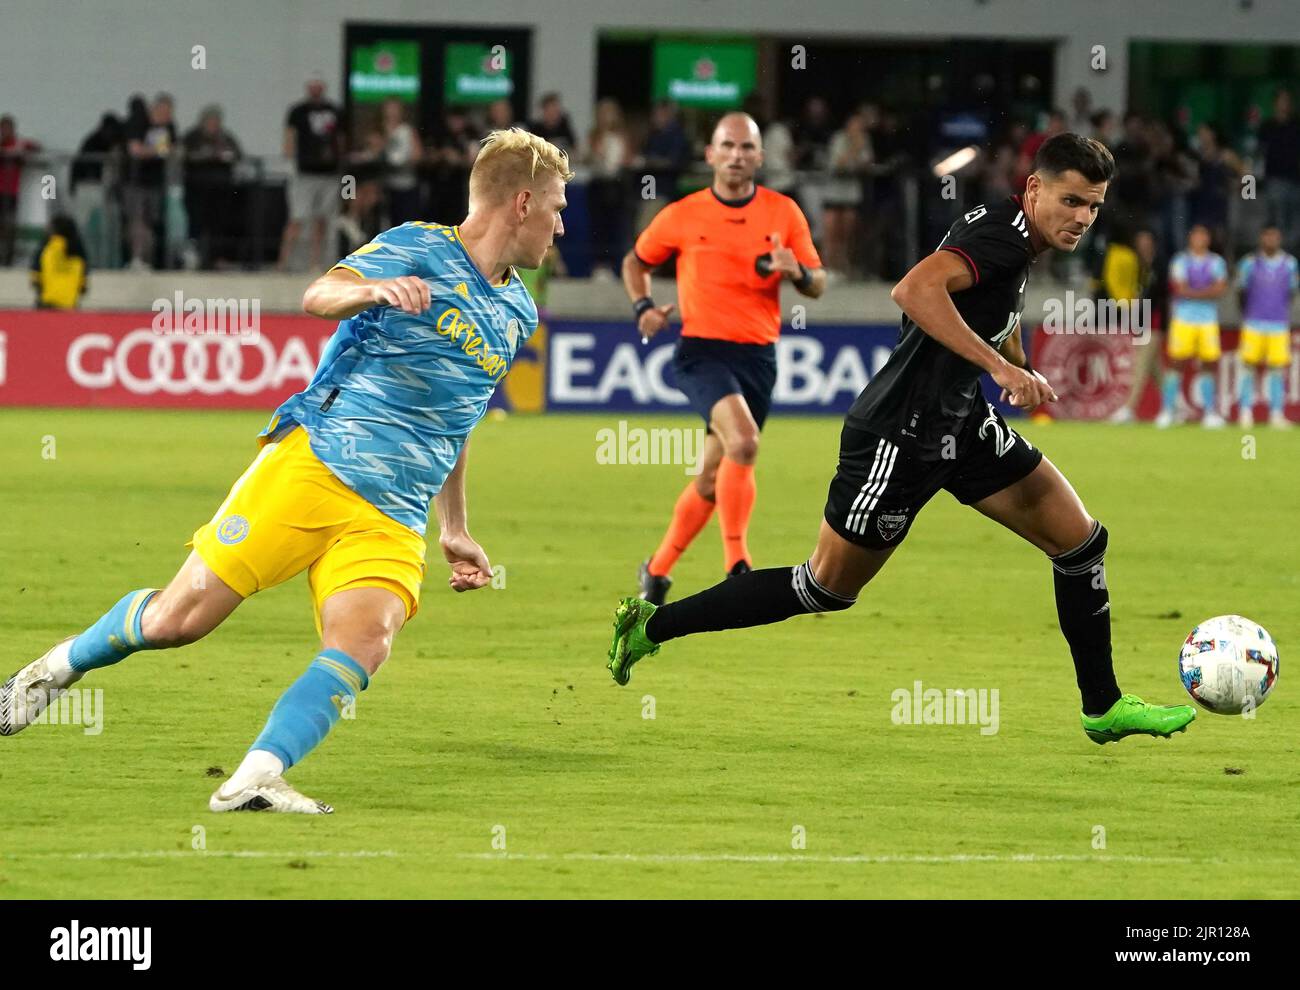 WASHINGTON, DC, USA - 20 AUGUST 2022: D.C. United forwardMi Miguel Barry (22) on the attack during a MLS match between D.C United and the Philadelphia Union on August 20, 2022, at Audi Field, in Washington, DC. (Photo by Tony Quinn-Alamy Live News) Stock Photo